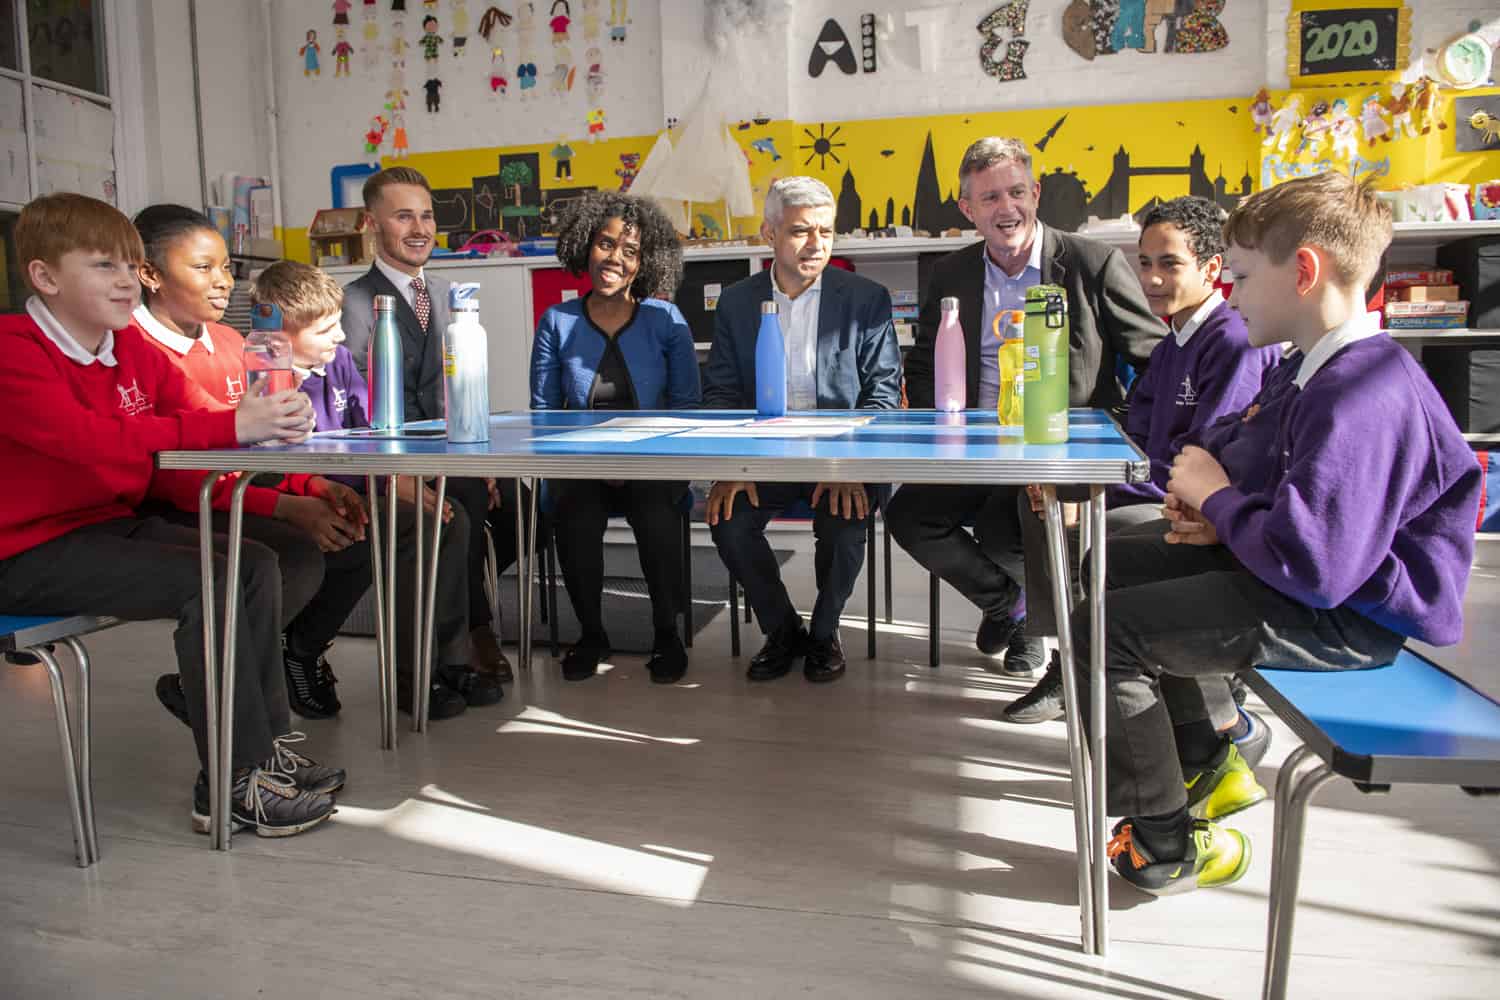 Pupils alongside Cllr Evelyn Akoto and Mayor Sadiq Khan announcing the policy